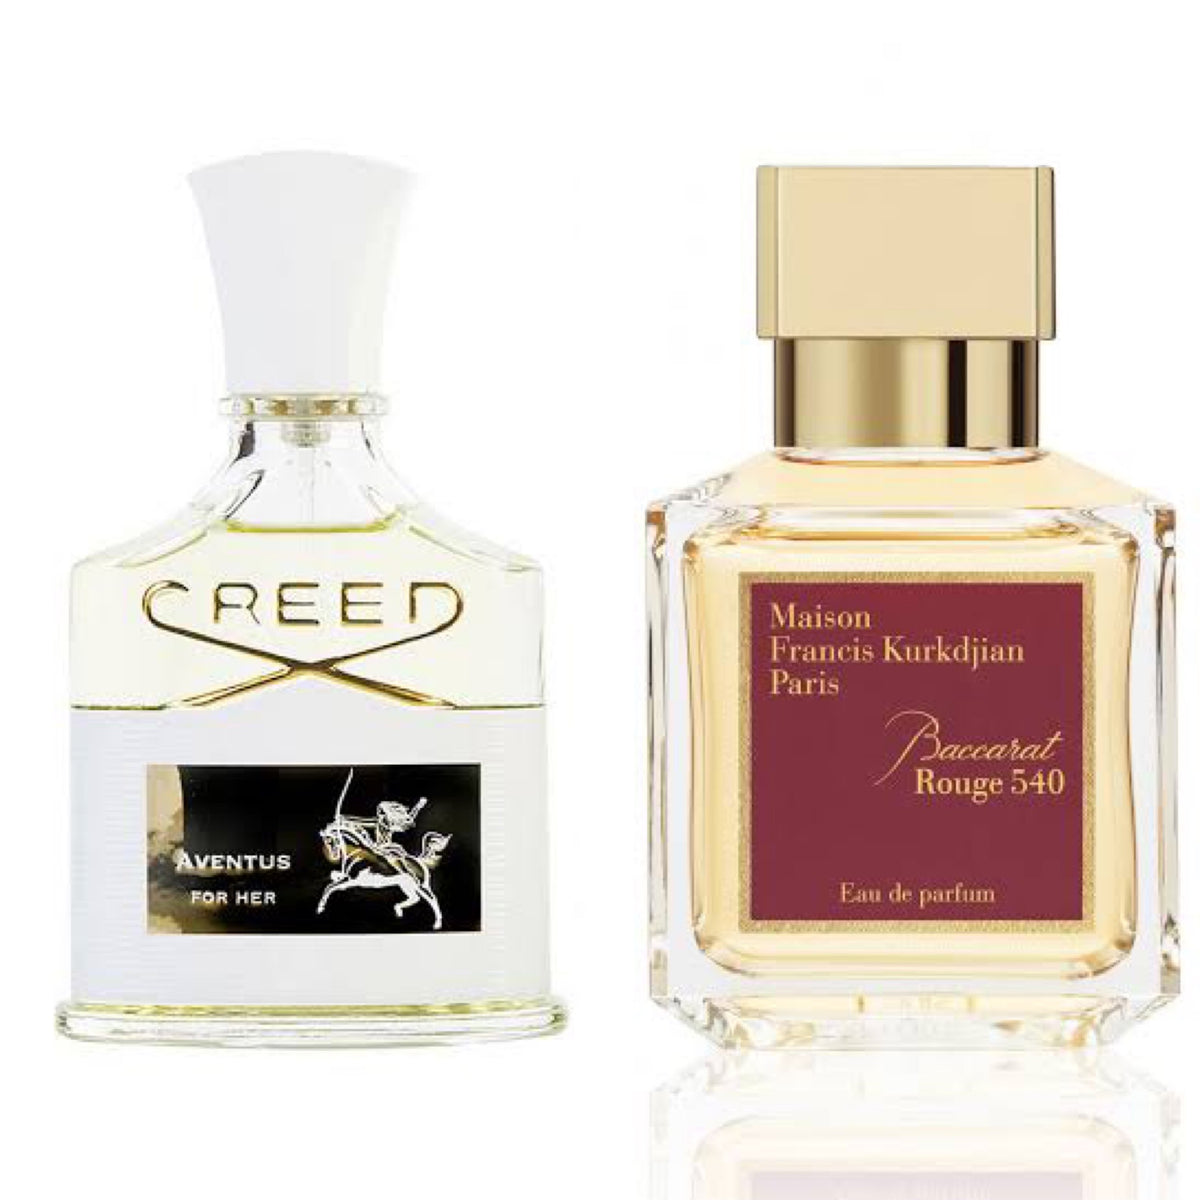 Creed Aventus For Her & MFK Baccarat Rouge 540 SET